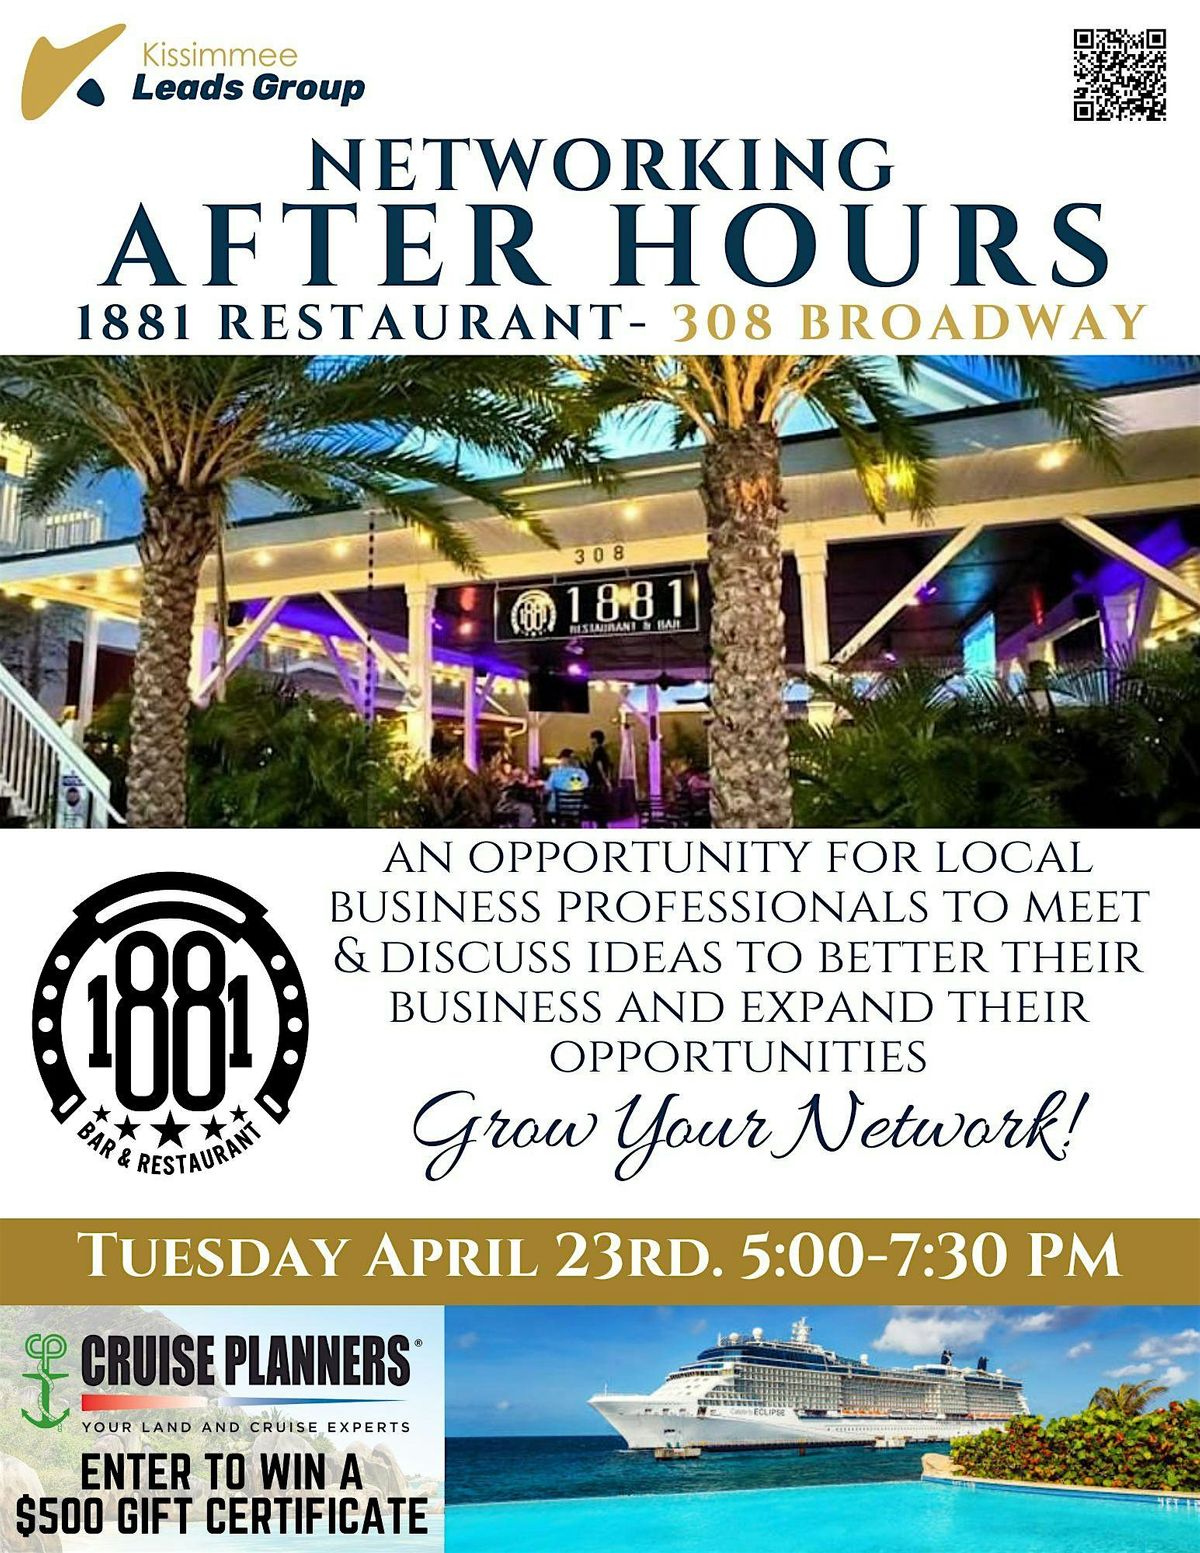 Networking After Hours - KLG - FREE EVENT!